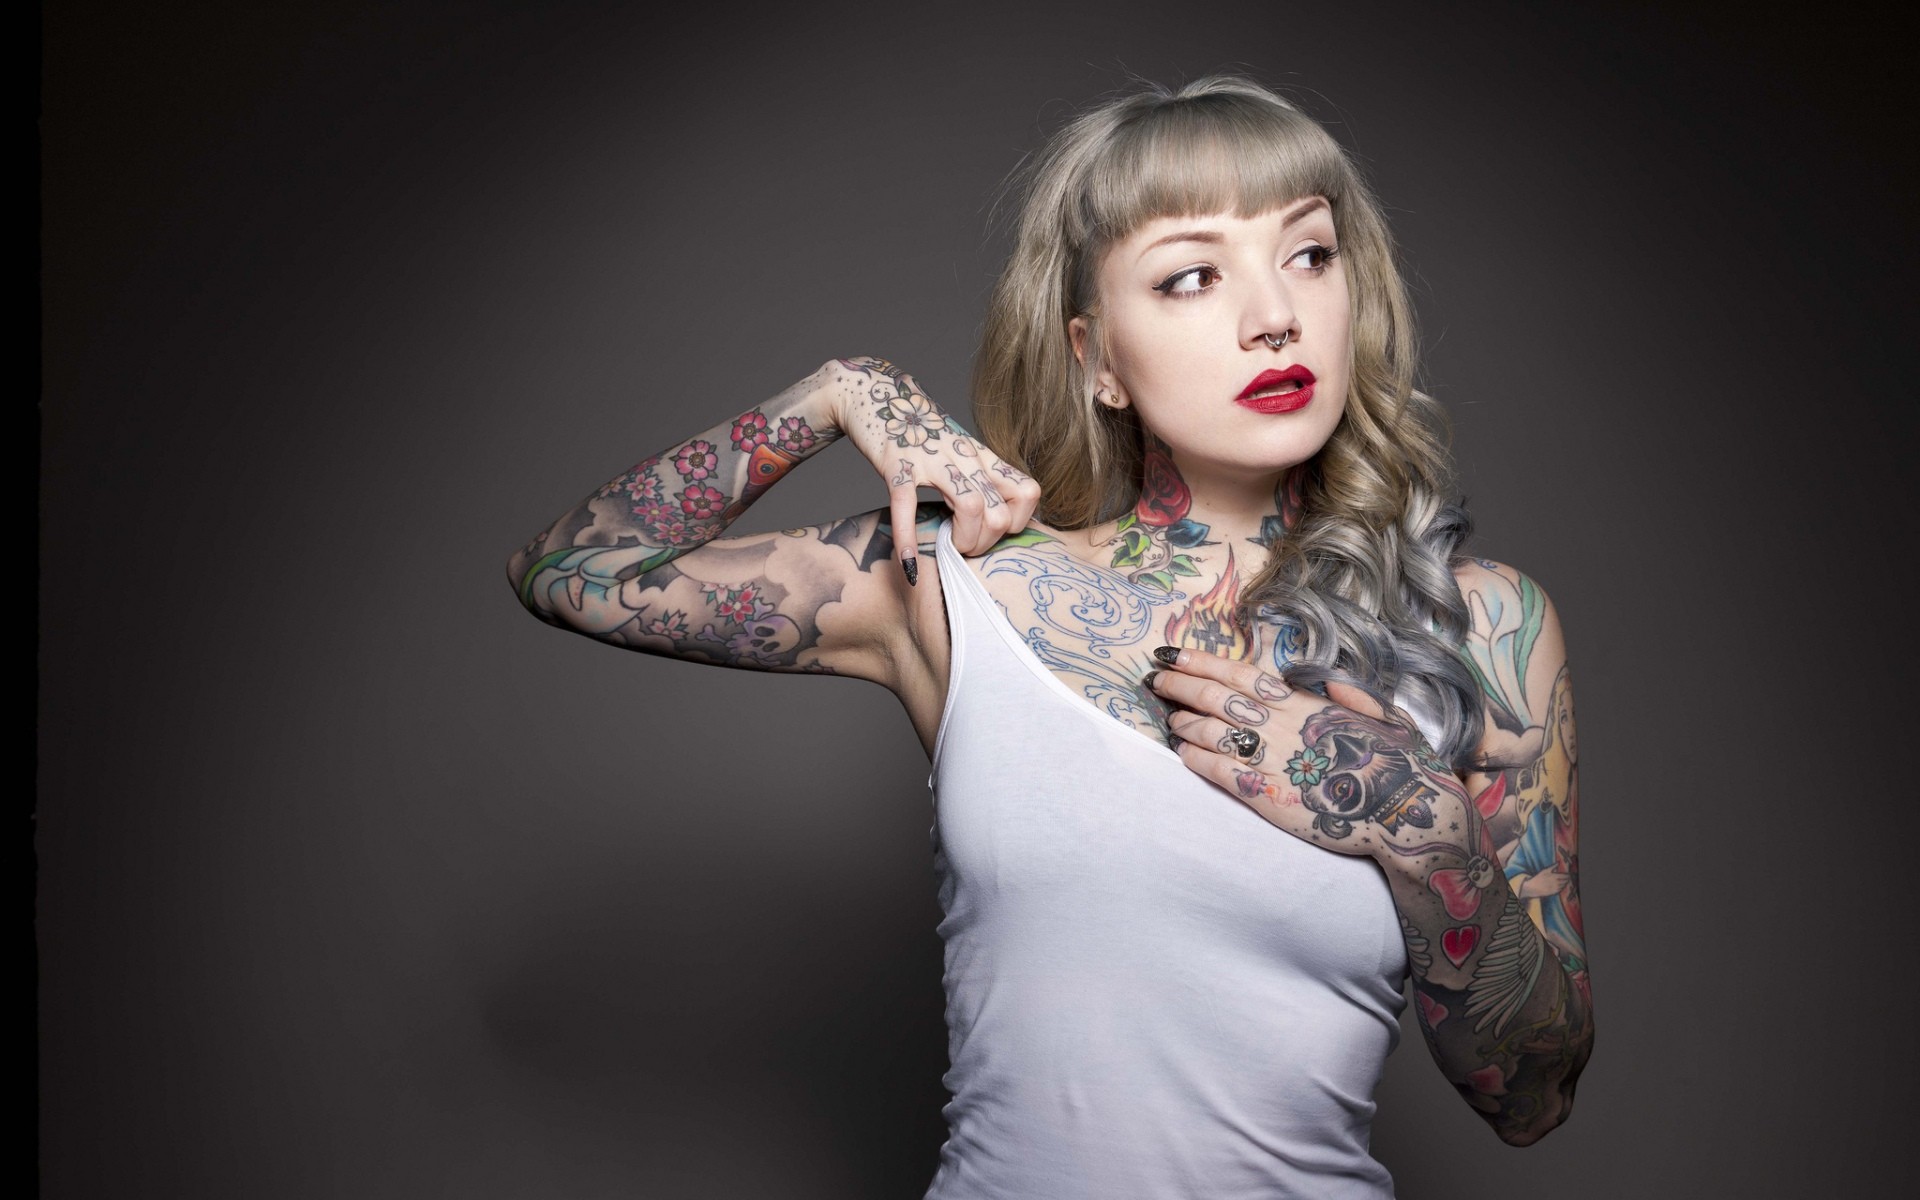 Tattooed woman in a white shirt wallpapers and images - wallpapers ...